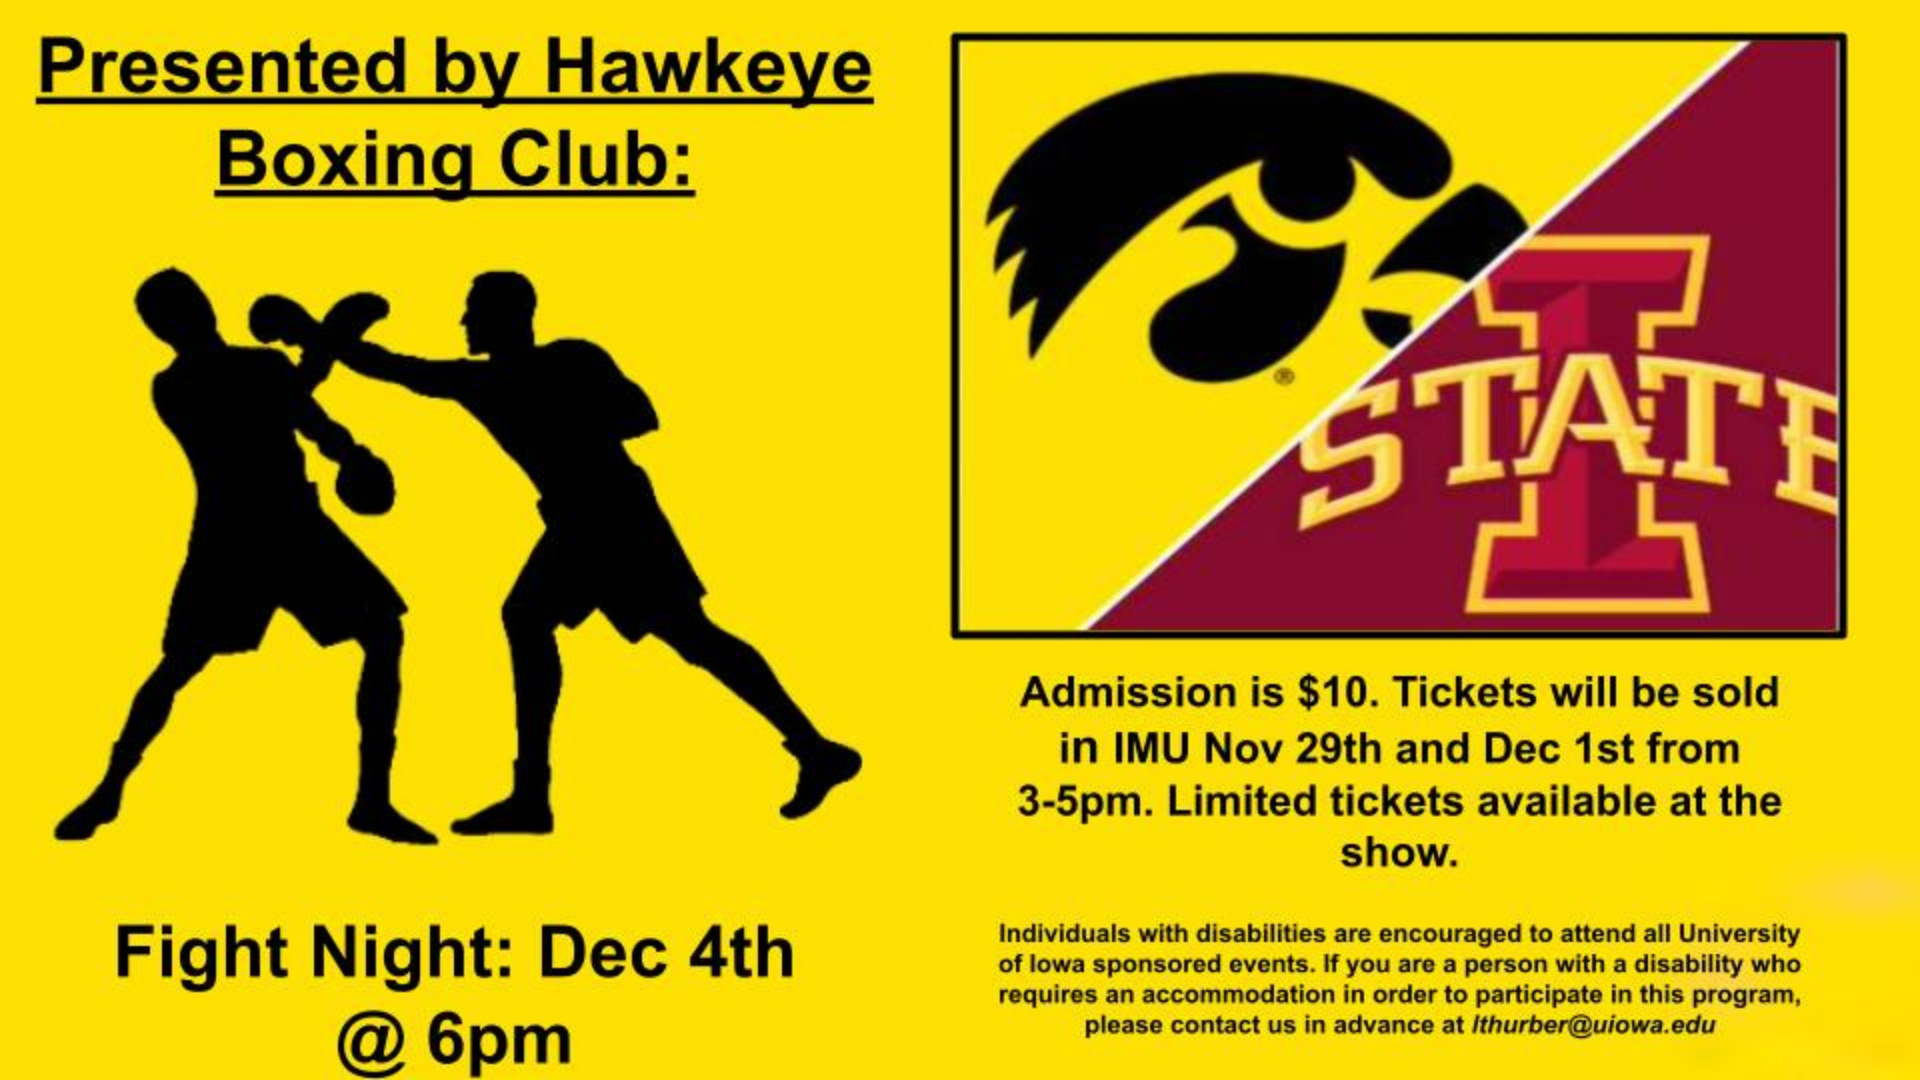 Presented by Hawkeye Boxing Club: Fight Night: Dec. 4th @ 6pm. Admission is $10. Tickets will be sold in IMU Nov. 29th and Dec. 1st from 3-5pm. Limited tickets available at the show.